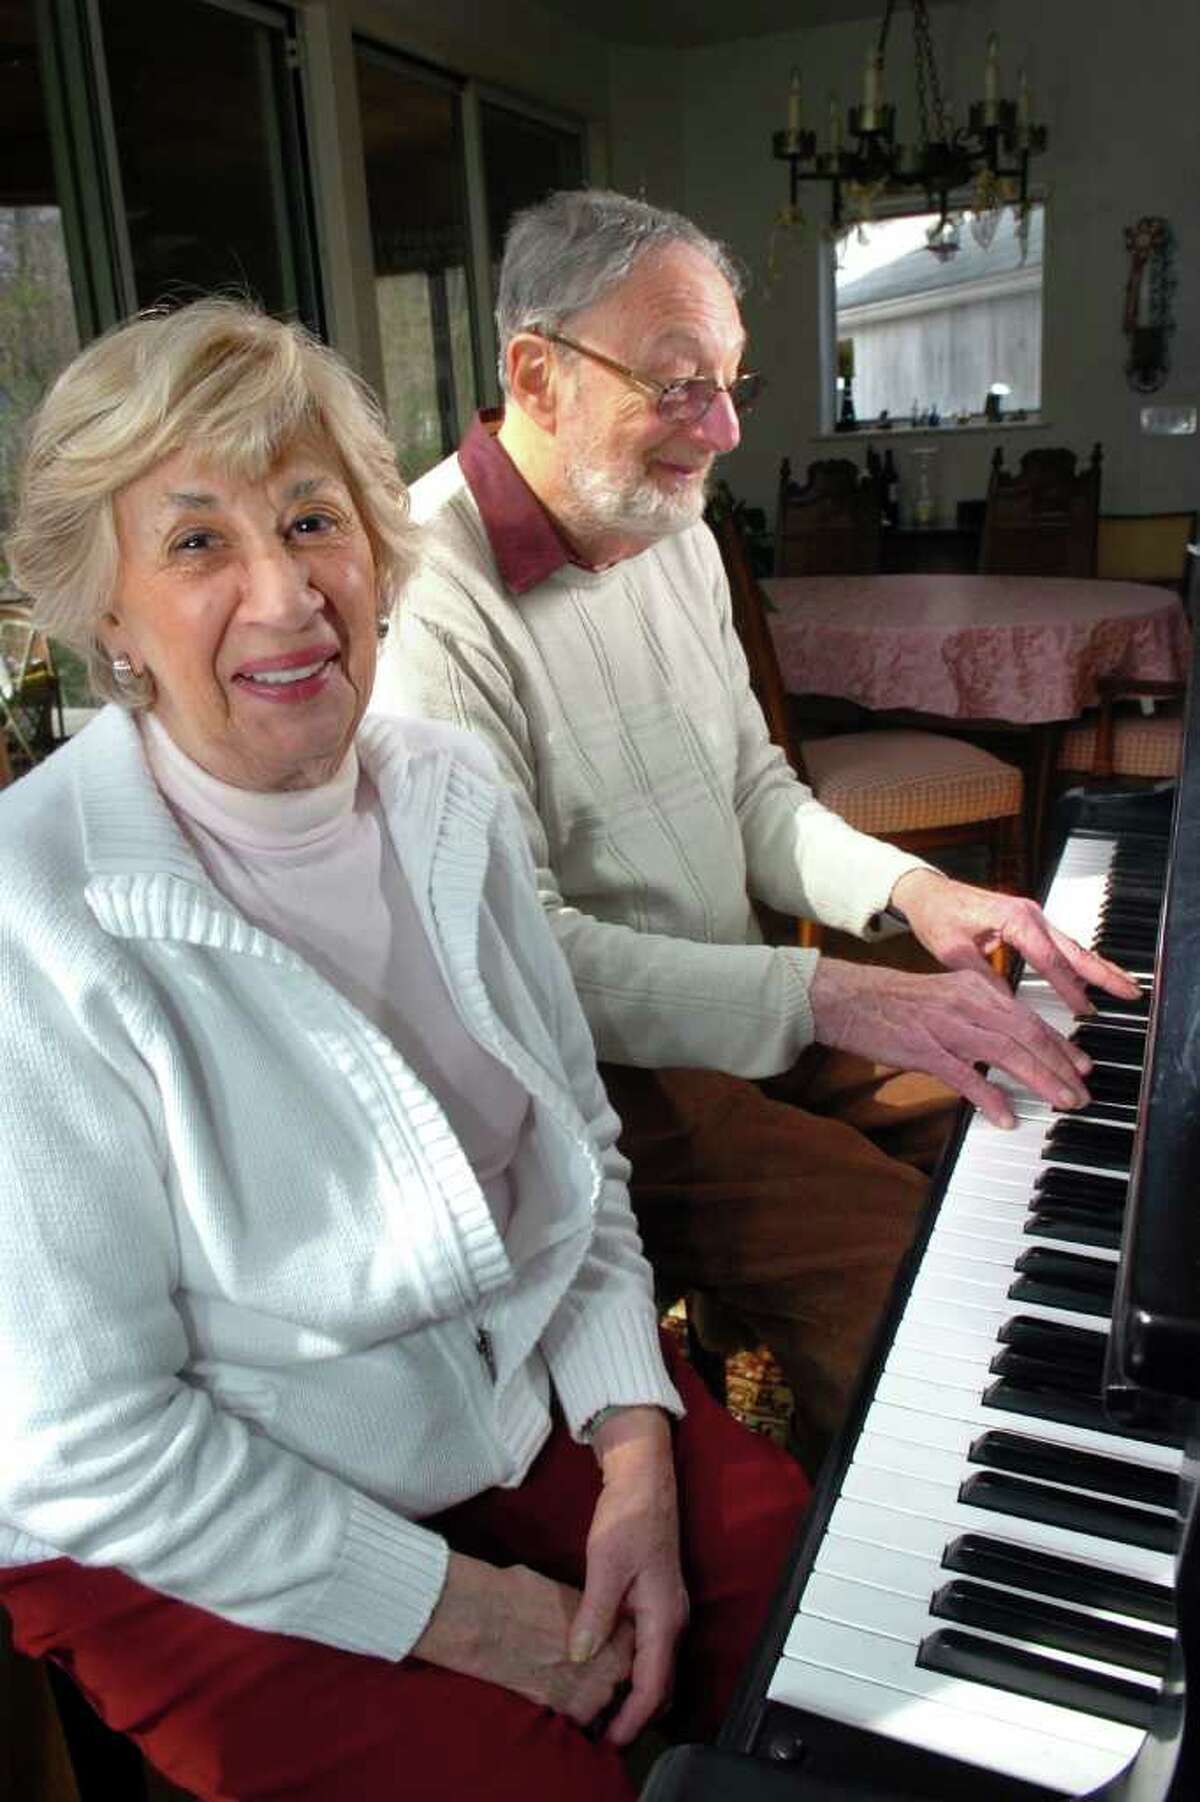 Ted and Jean Simons at the piano in their Westport, Conn. home April 20th, 2011.